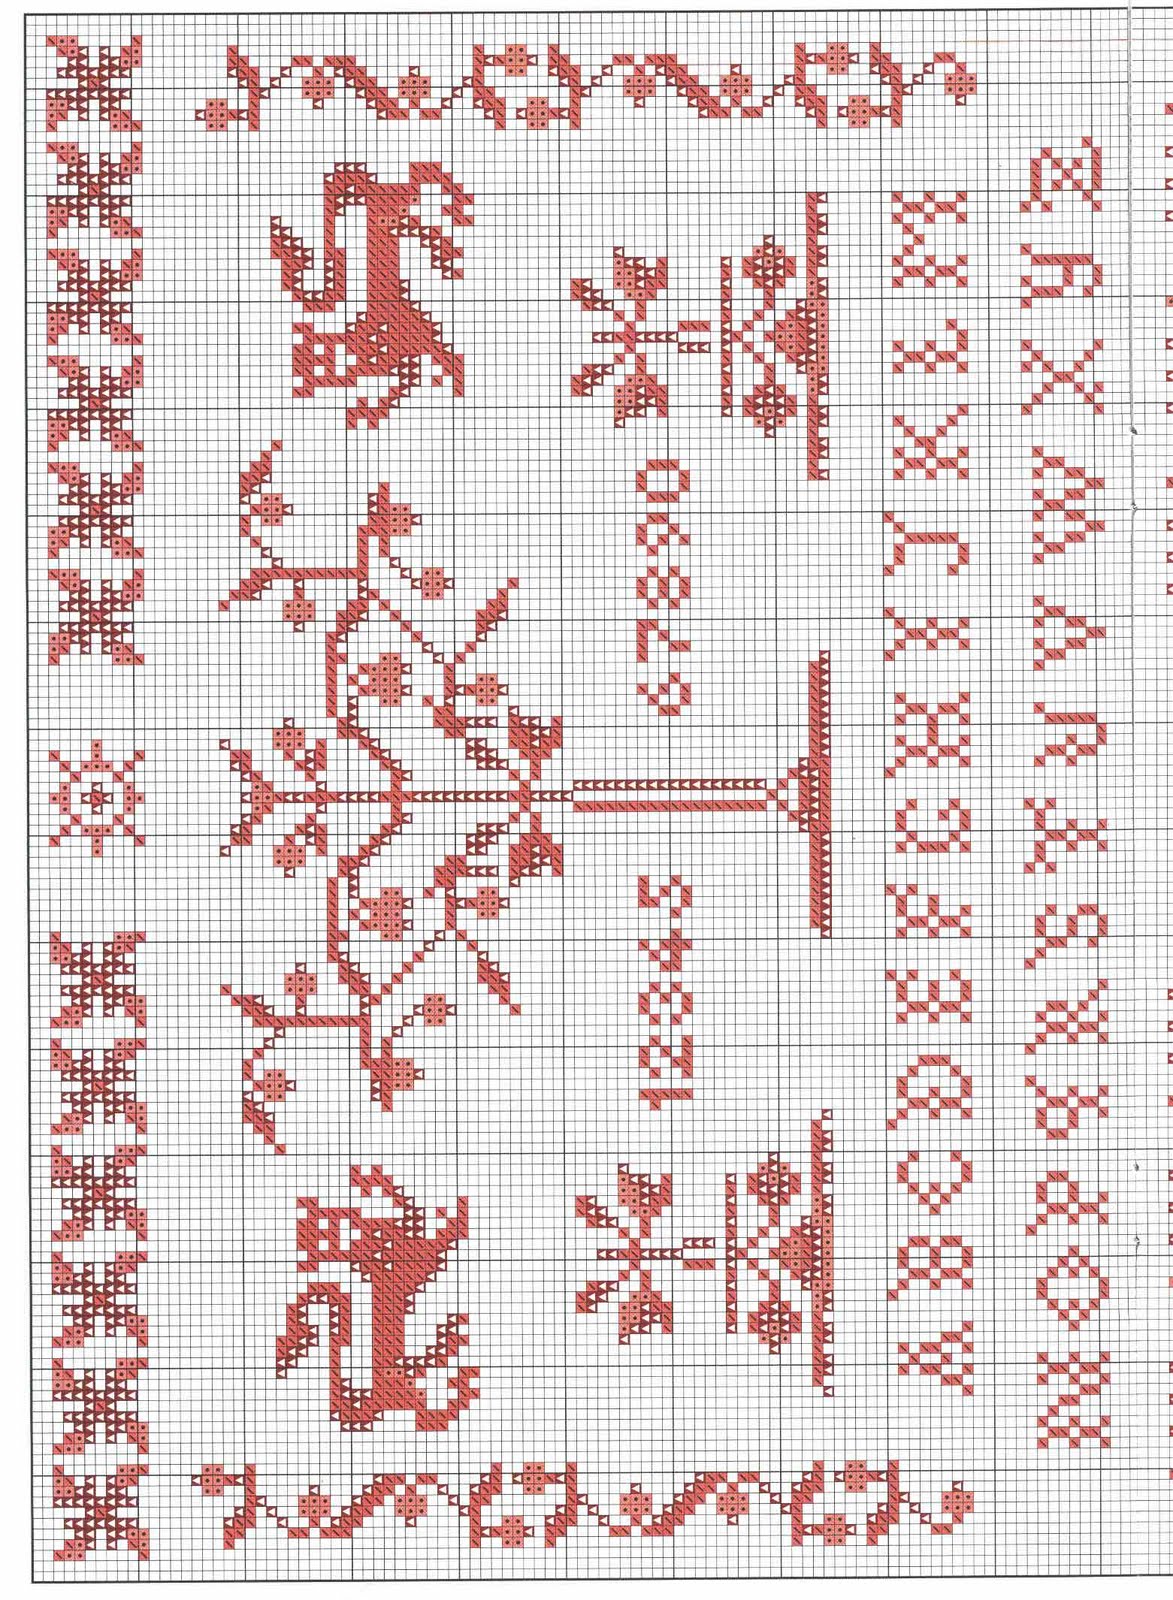 Red cross stitch sampler with various shapes and symbols (2)